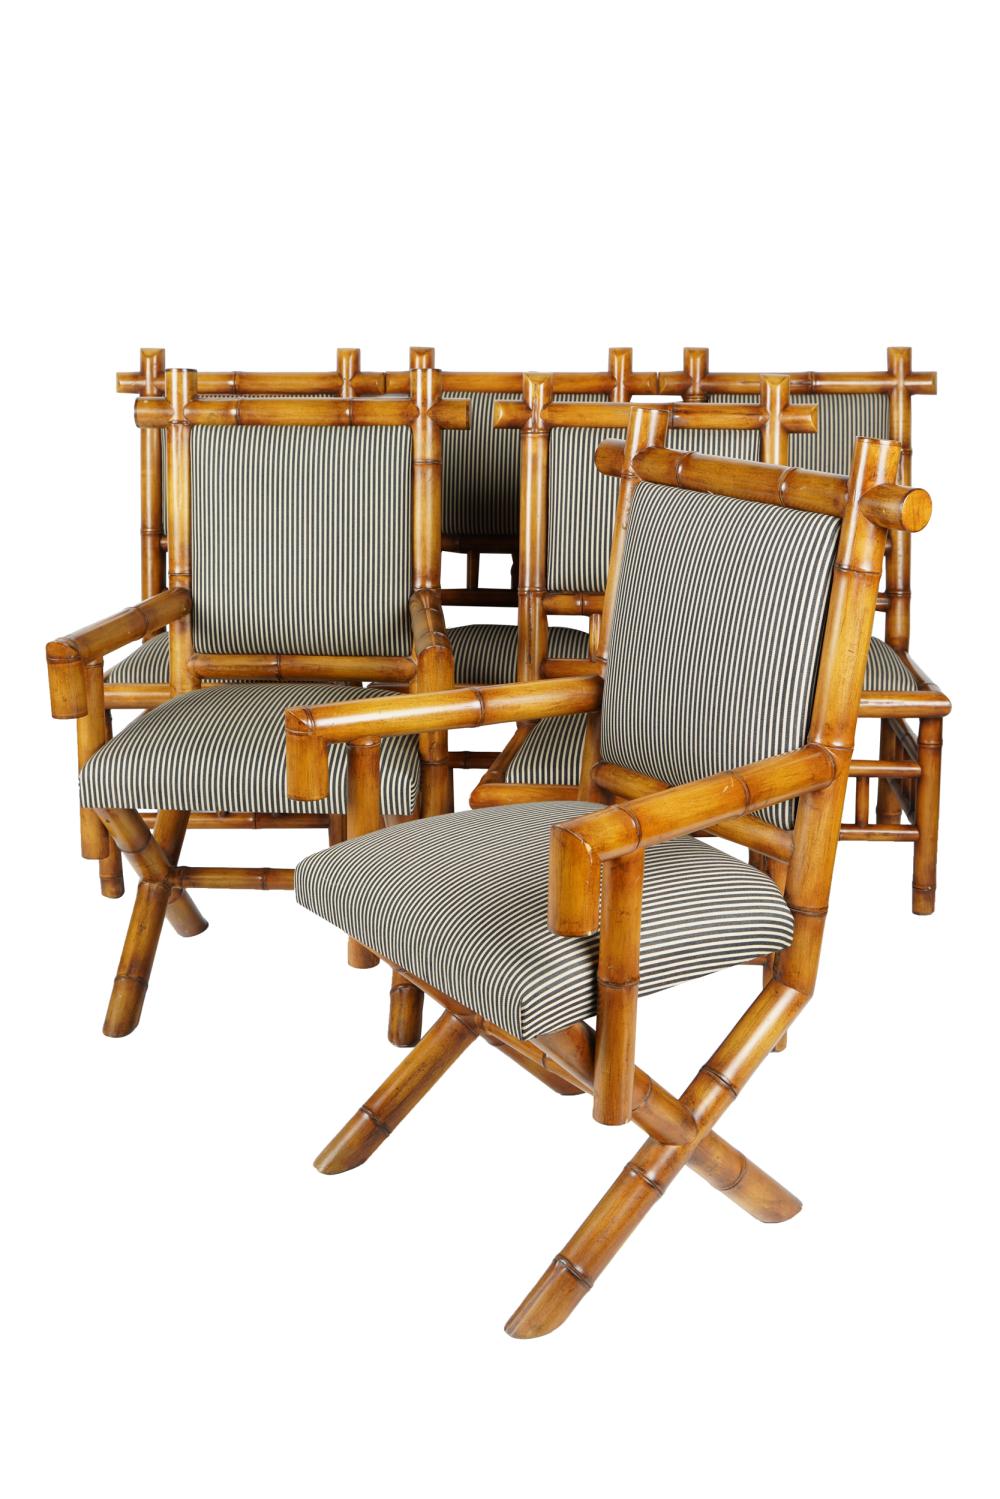 GROUP OF BAMBOO DINING CHAIRScomprising